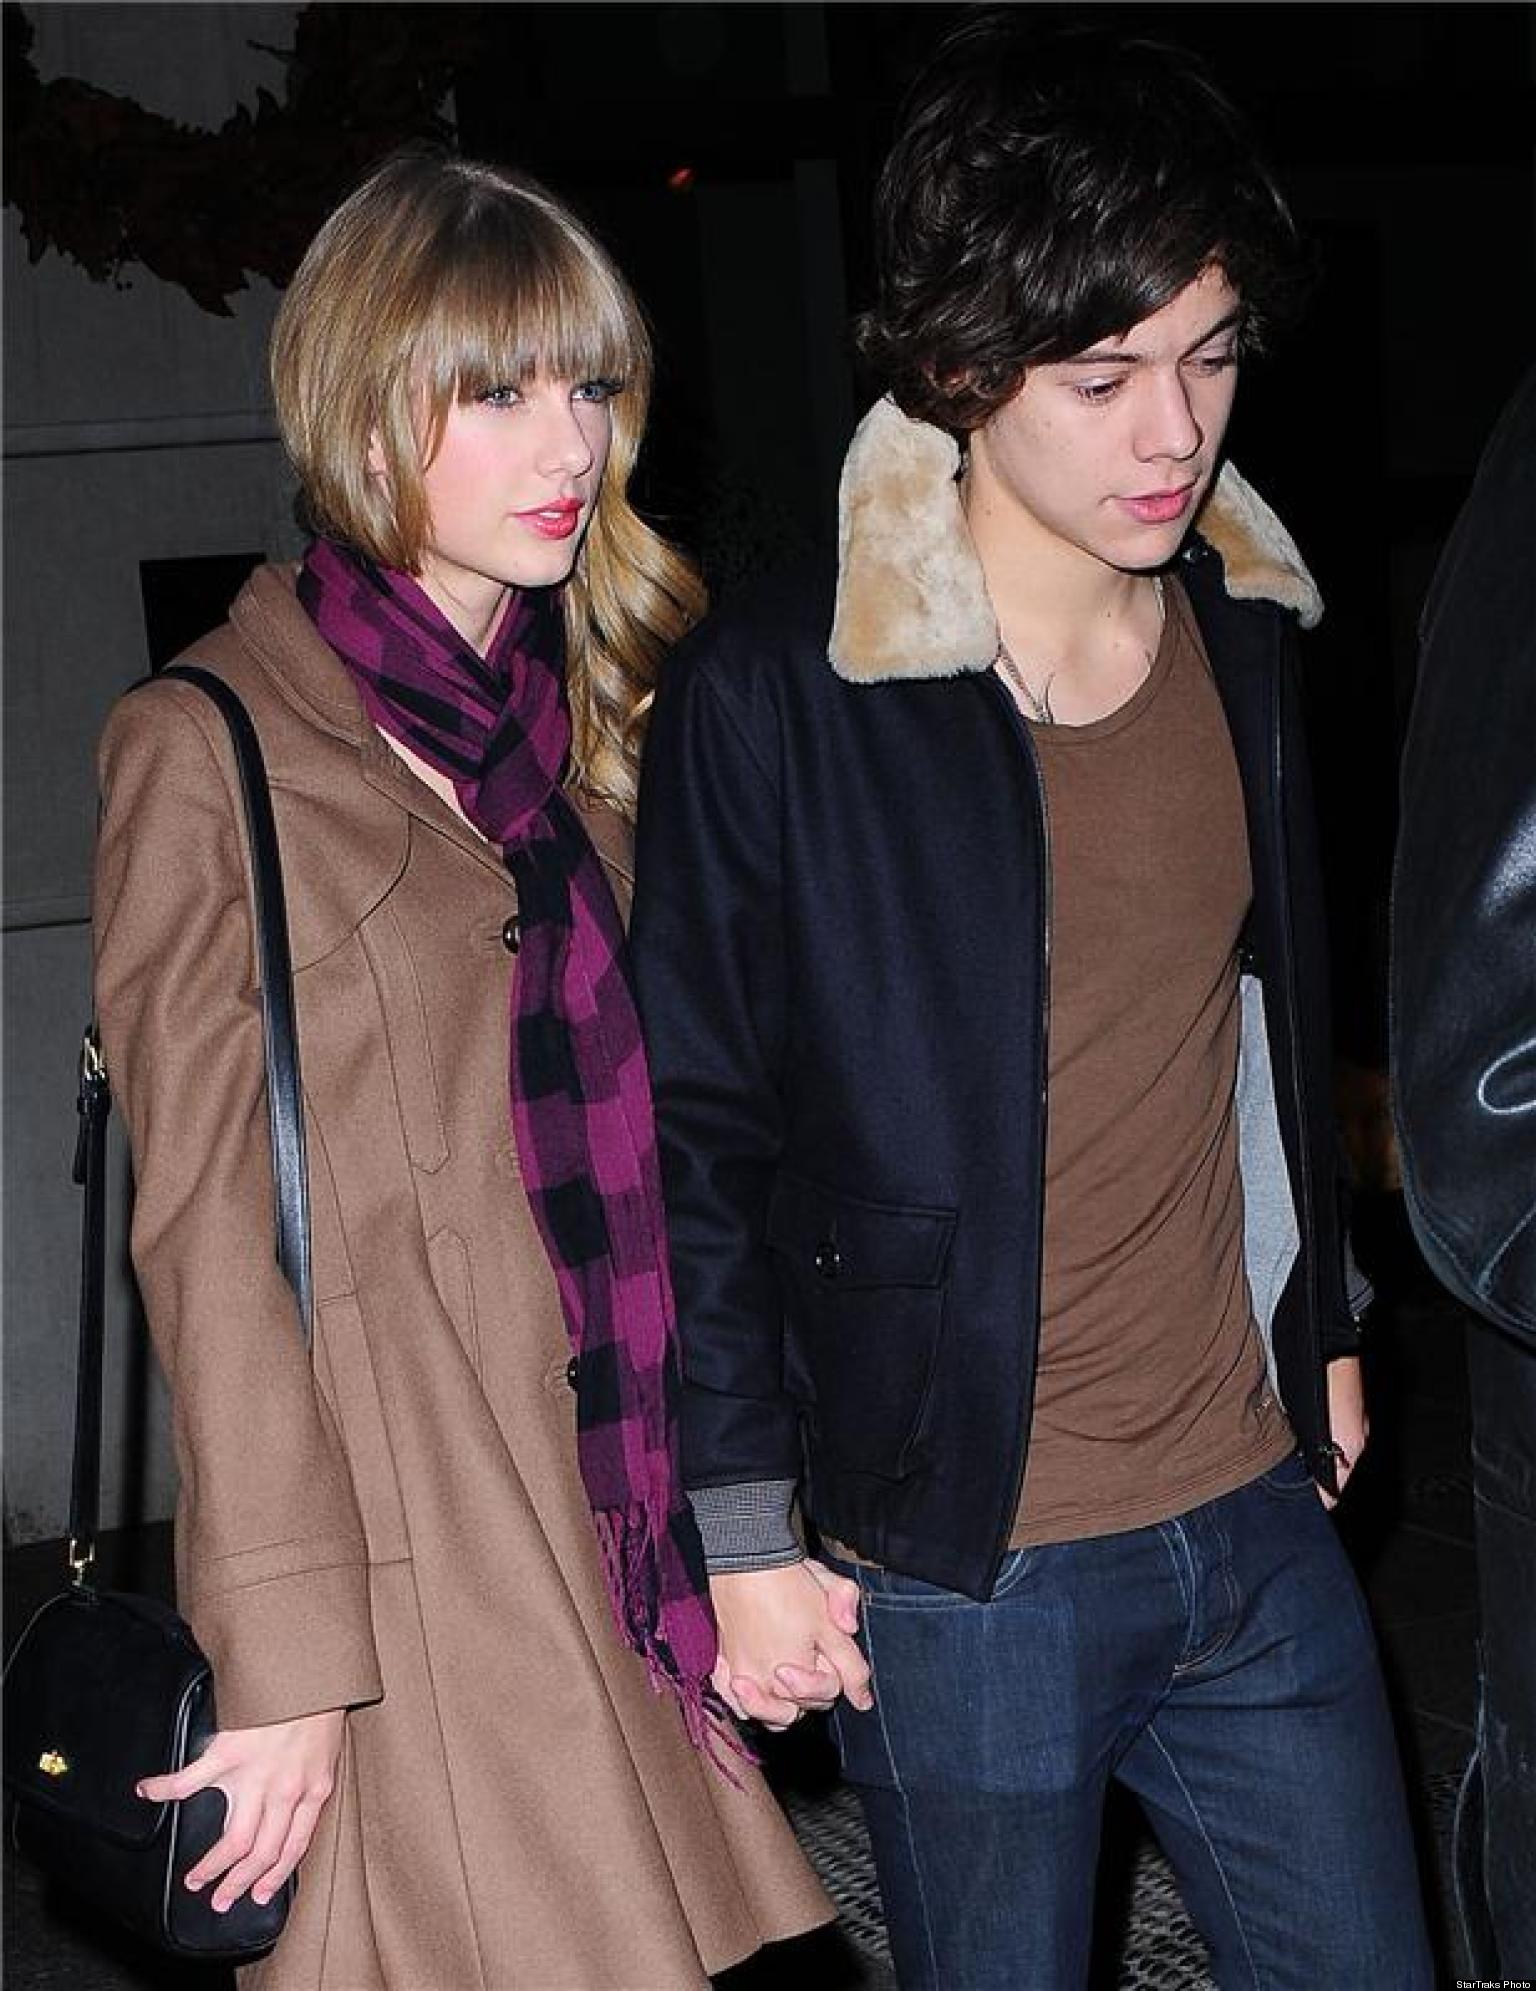 Haylor In London: Taylor Swift And Harry Styles Spotted Together In England (PHOTOS ...1536 x 1991